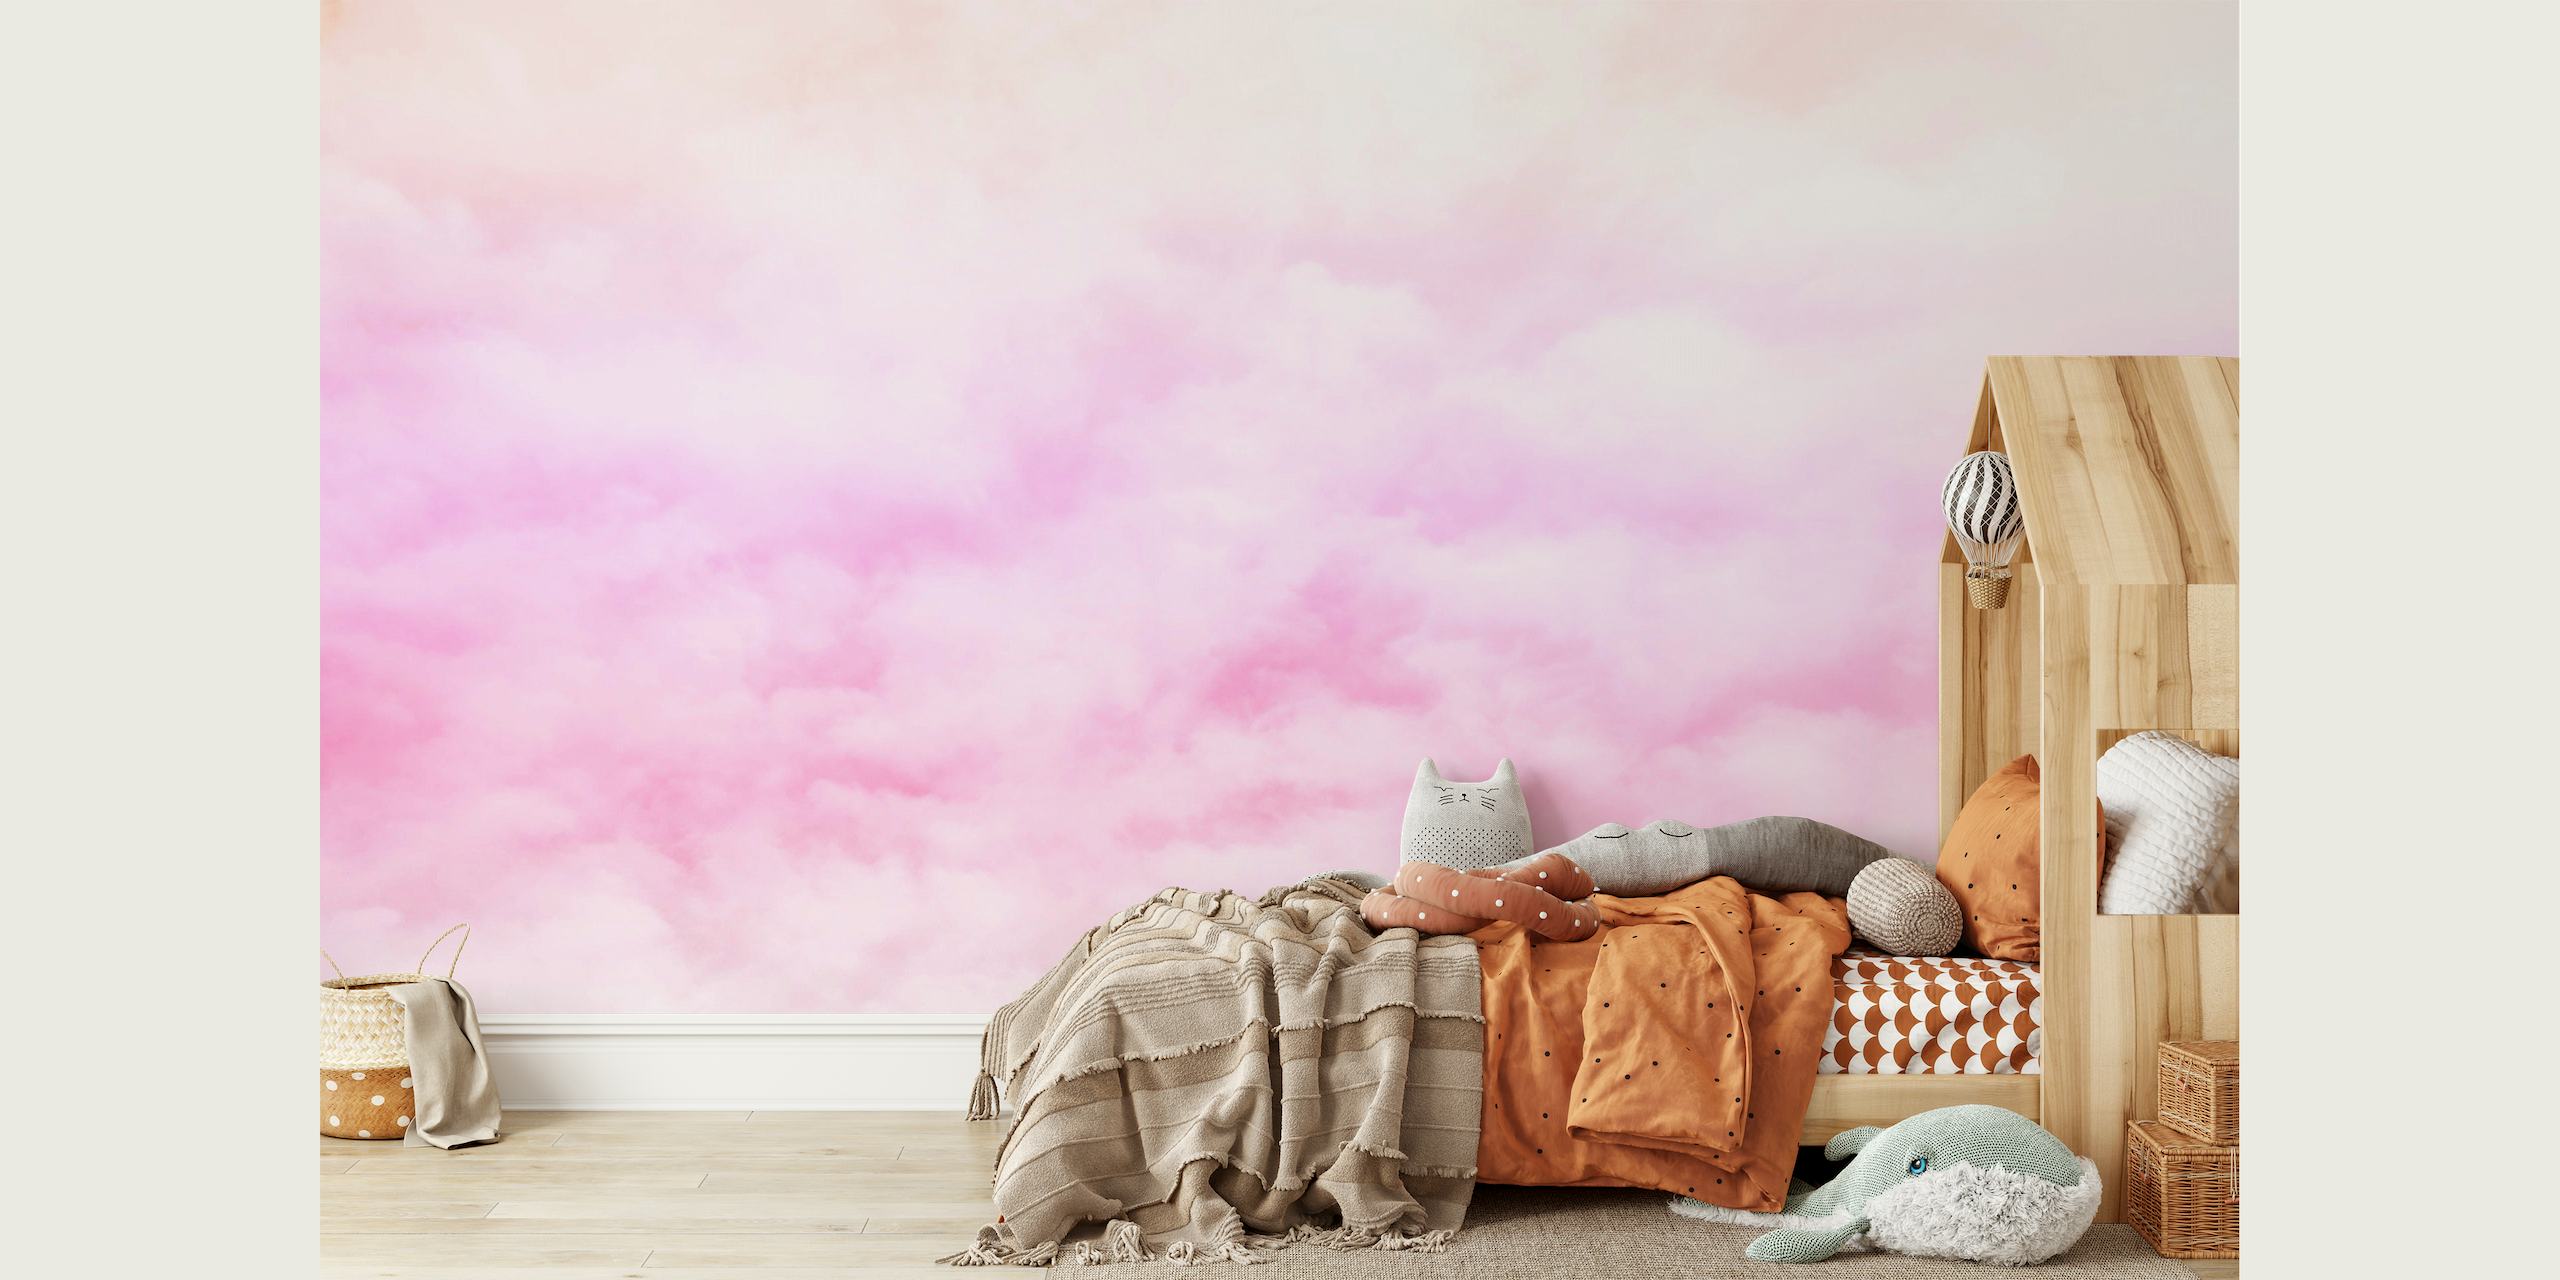 Subtle pink and white pastel clouds mural for a peaceful wall decor